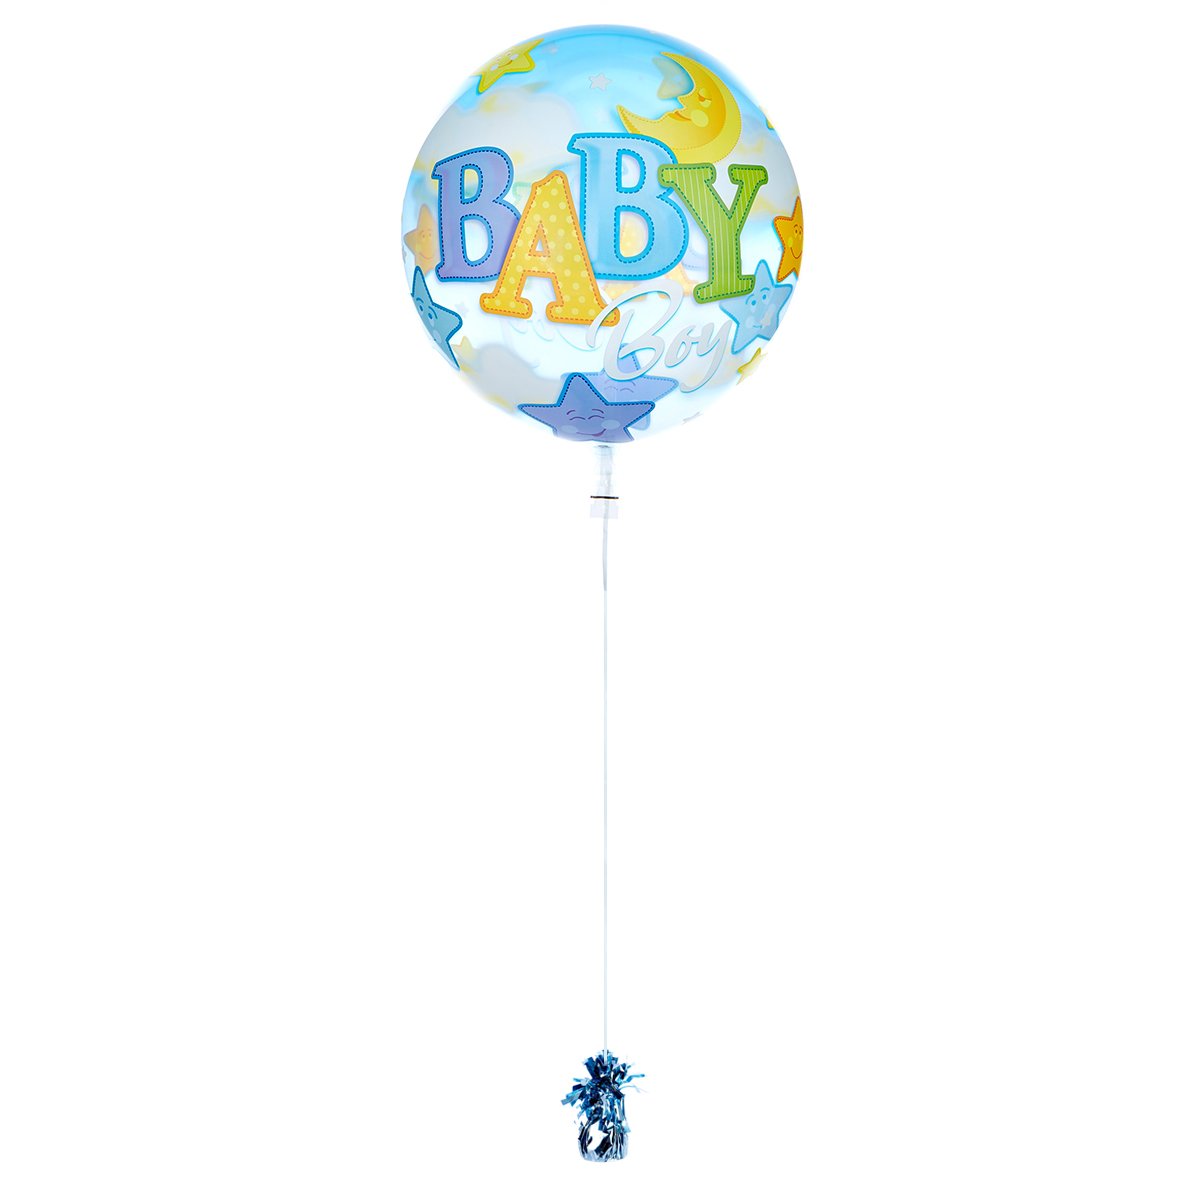 22-Inch Bubble Balloon - Baby Boy - DELIVERED INFLATED!